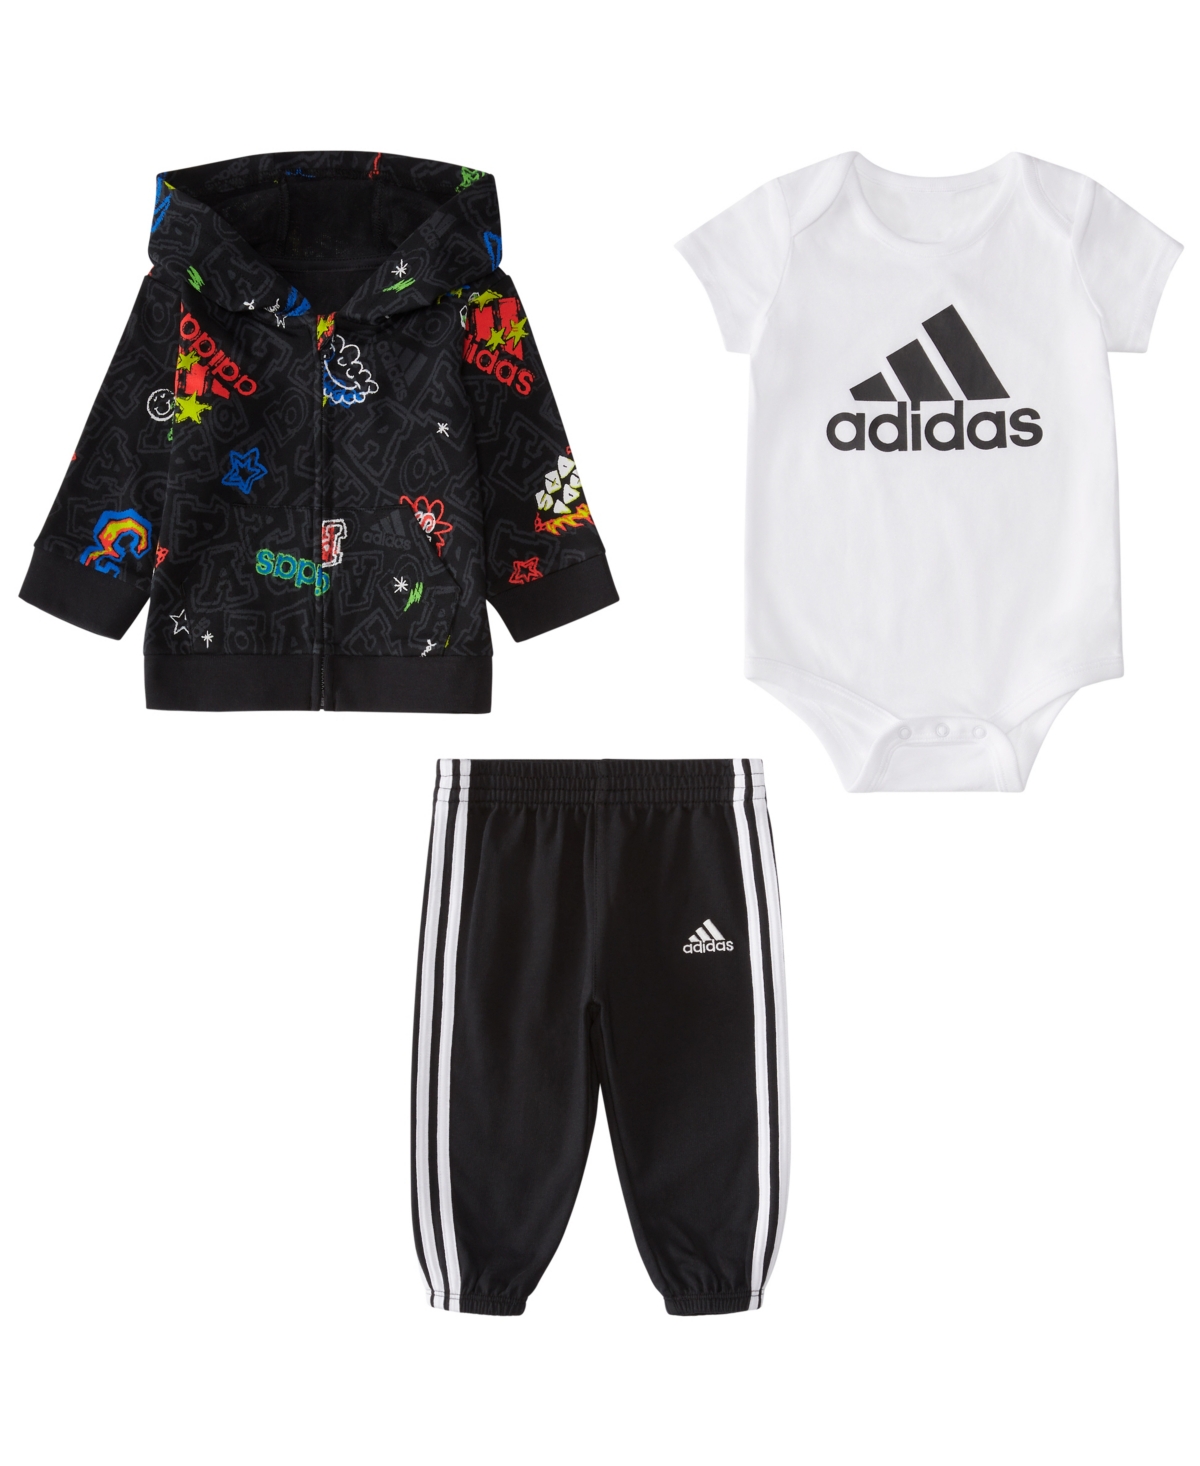 Adidas Originals Baby Boys Jacket, Bodysuit And Joggers, 3 Piece Set In Black With Multi